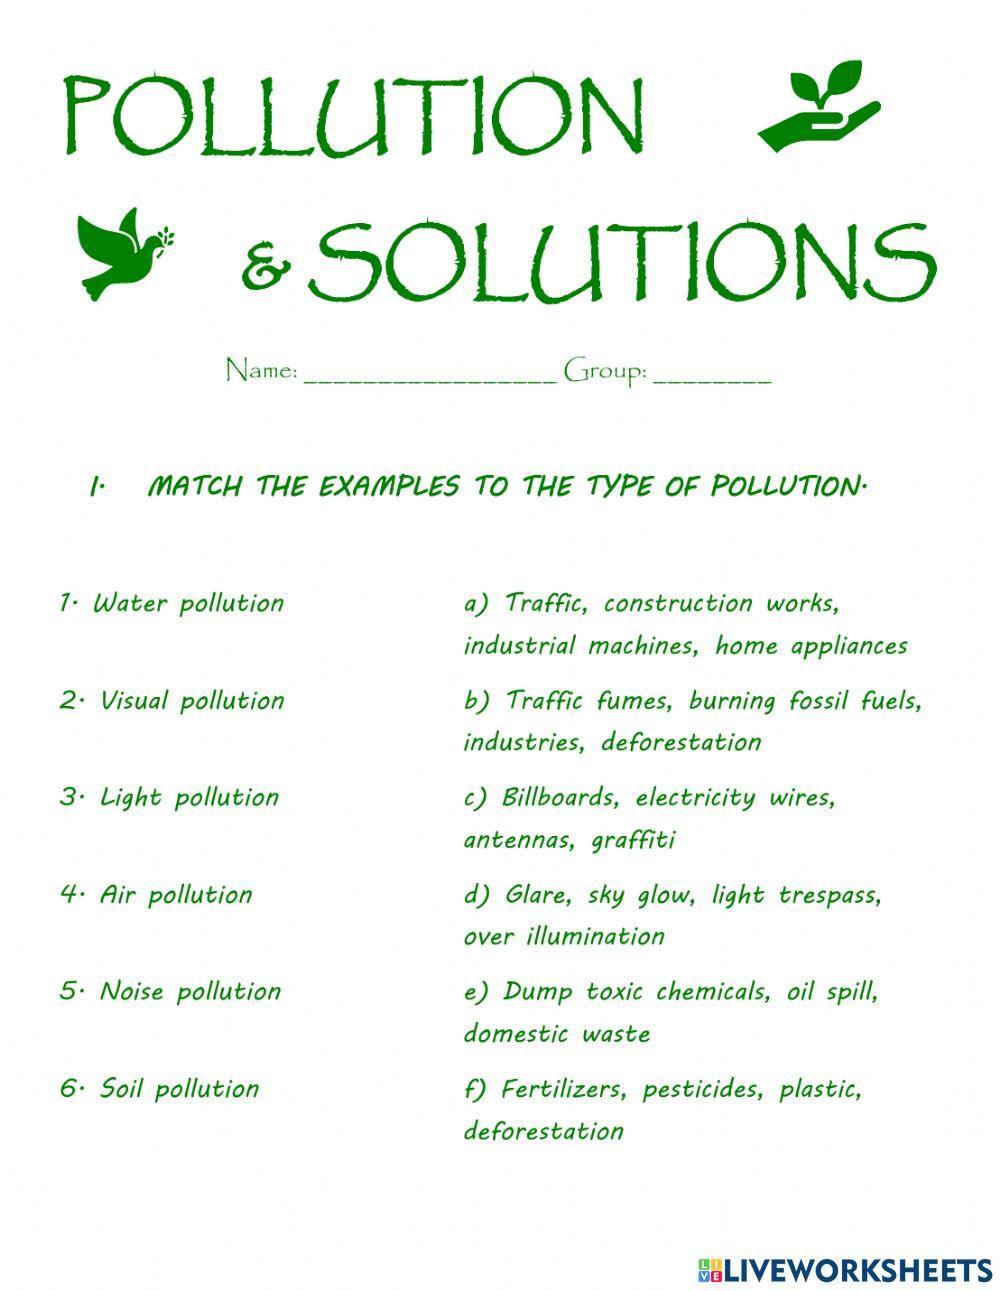 Pollution & Solutions